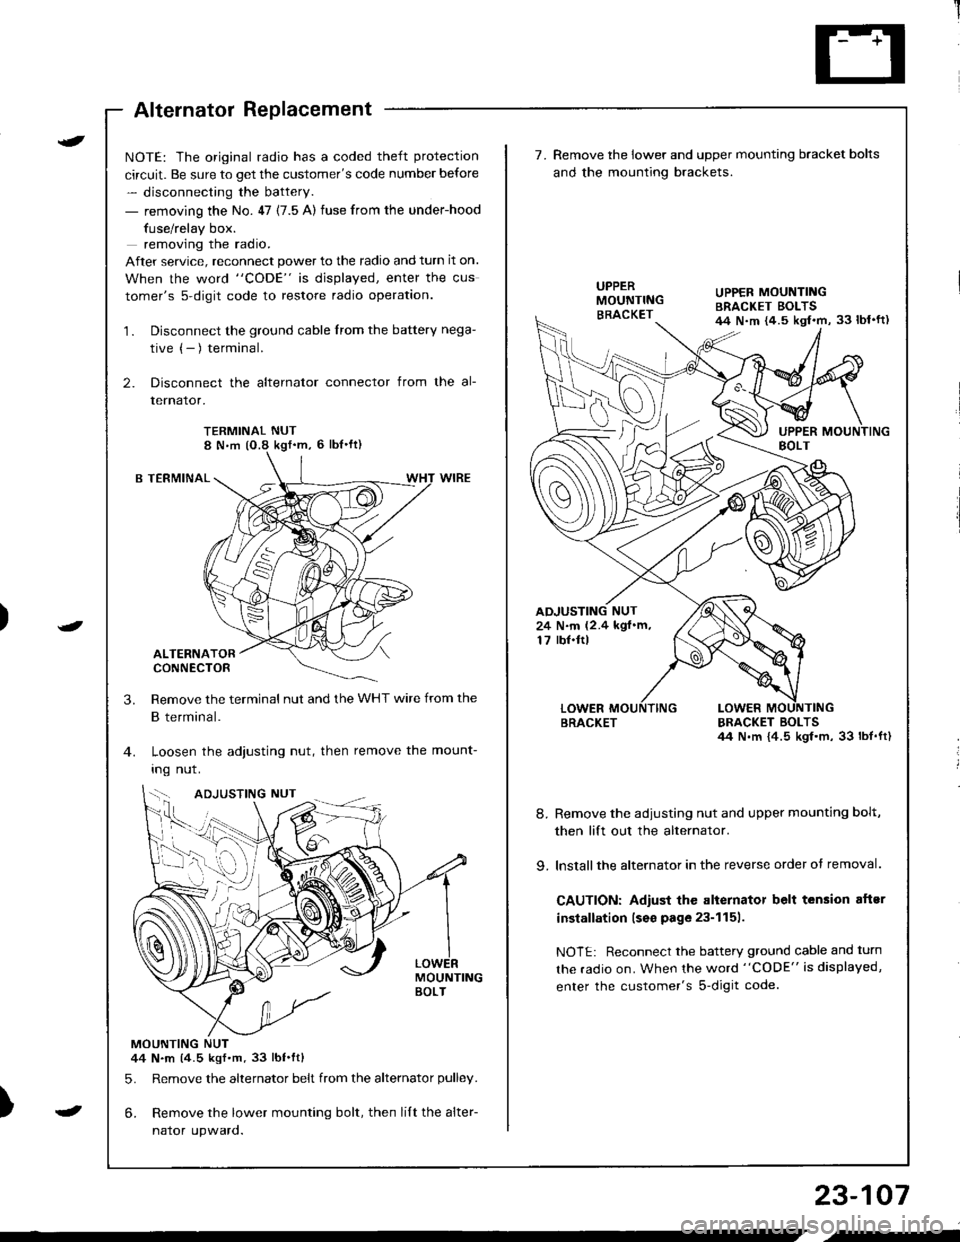 HONDA INTEGRA 1998 4.G User Guide Alternator Replacement
)
t
-
NOTE: The original radio has a coded theft protection
circuit. Be sure to get the customers code number before
- disconnecting the battery.
- removing the No. 47 (7.5 A) 